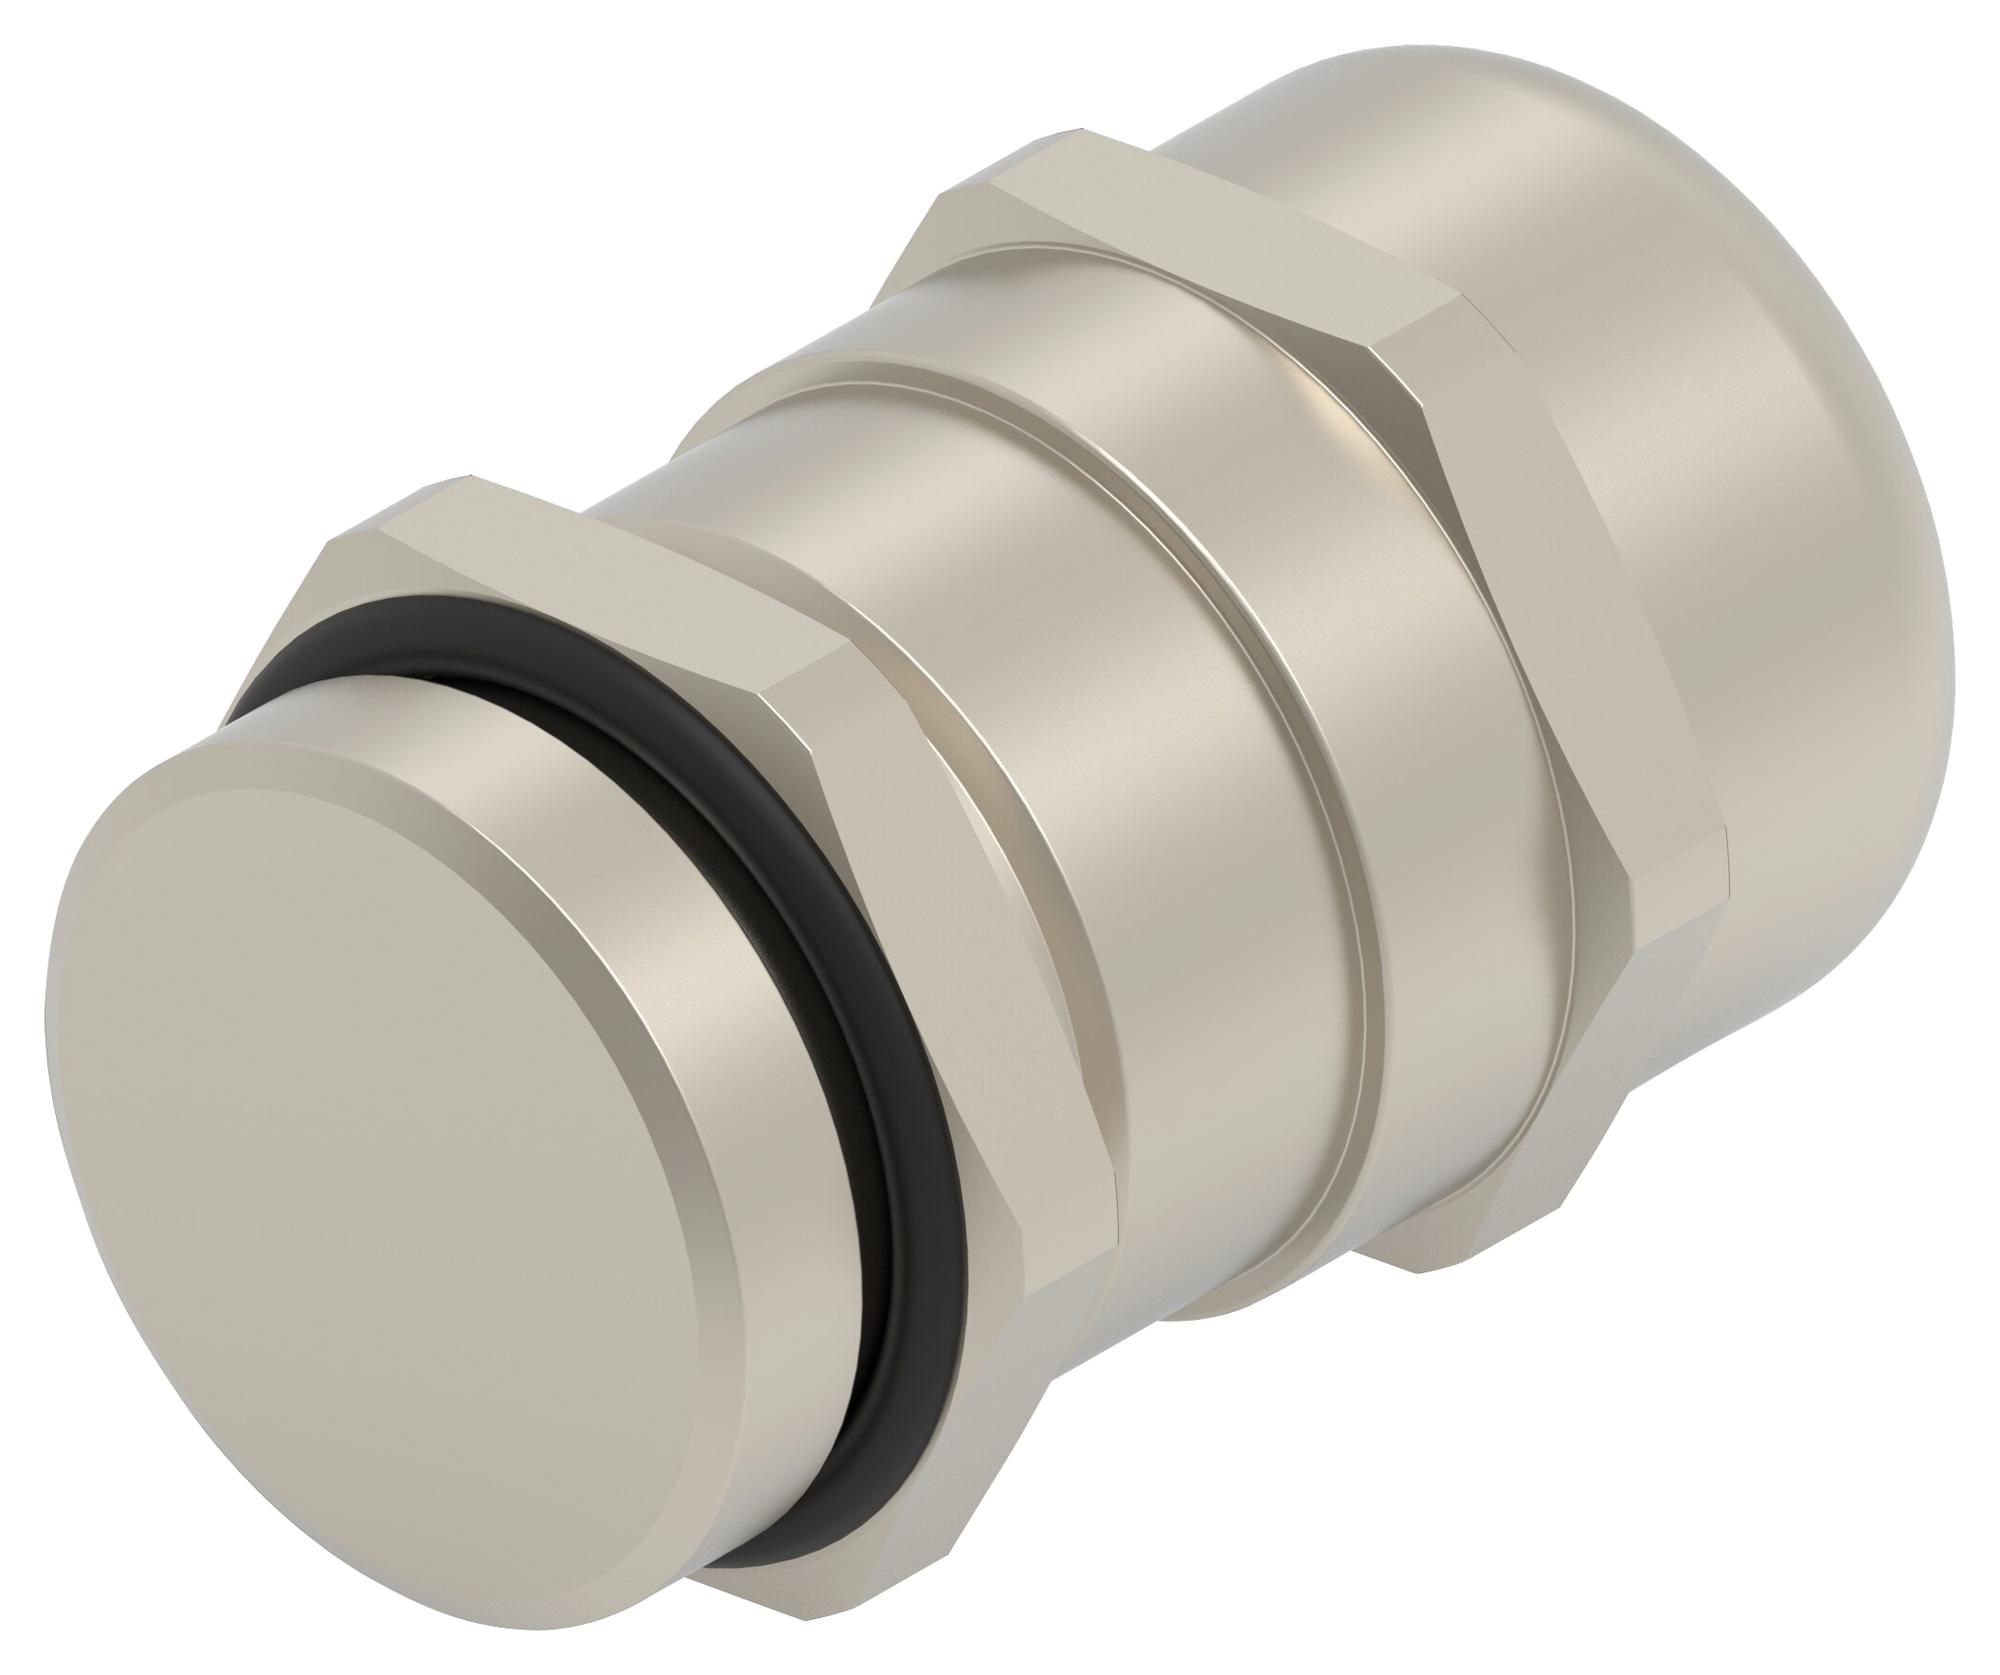 Entrelec TE Connectivity 1Sng614003R0000 Cable Gland, Brass, 10mm, M20X1.5